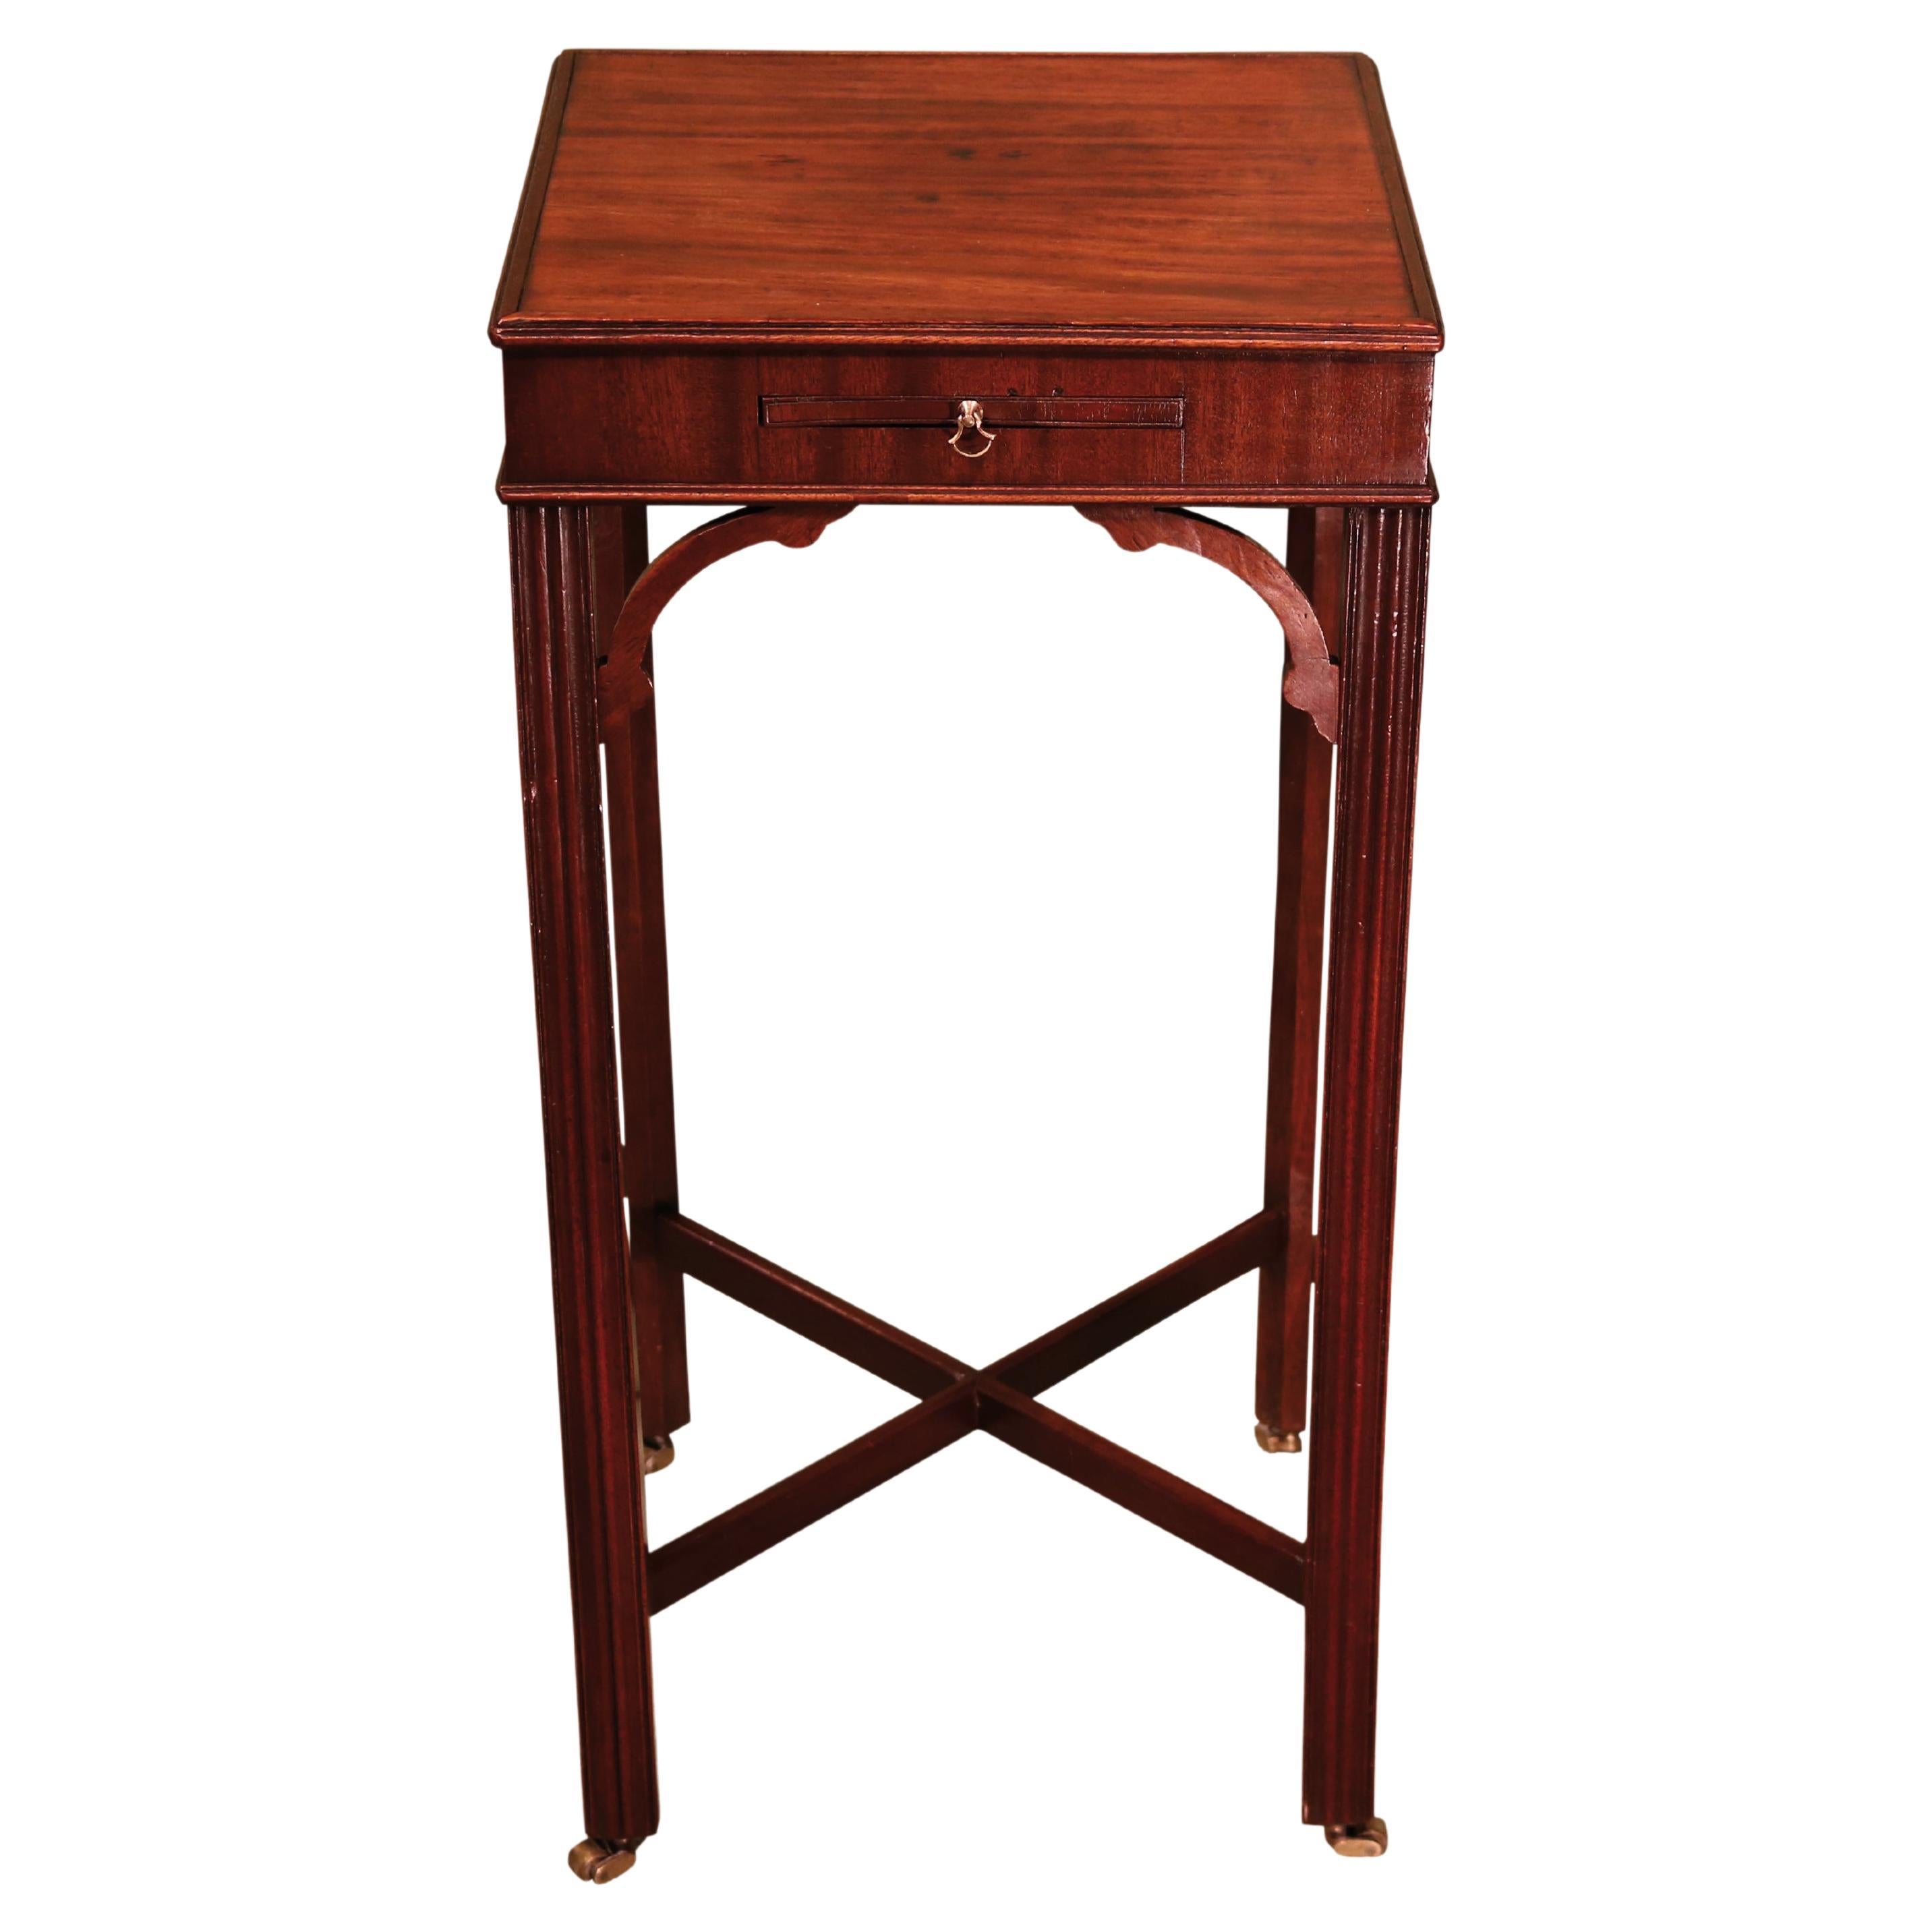 Chippendale Period Mahogany Kettle Stand